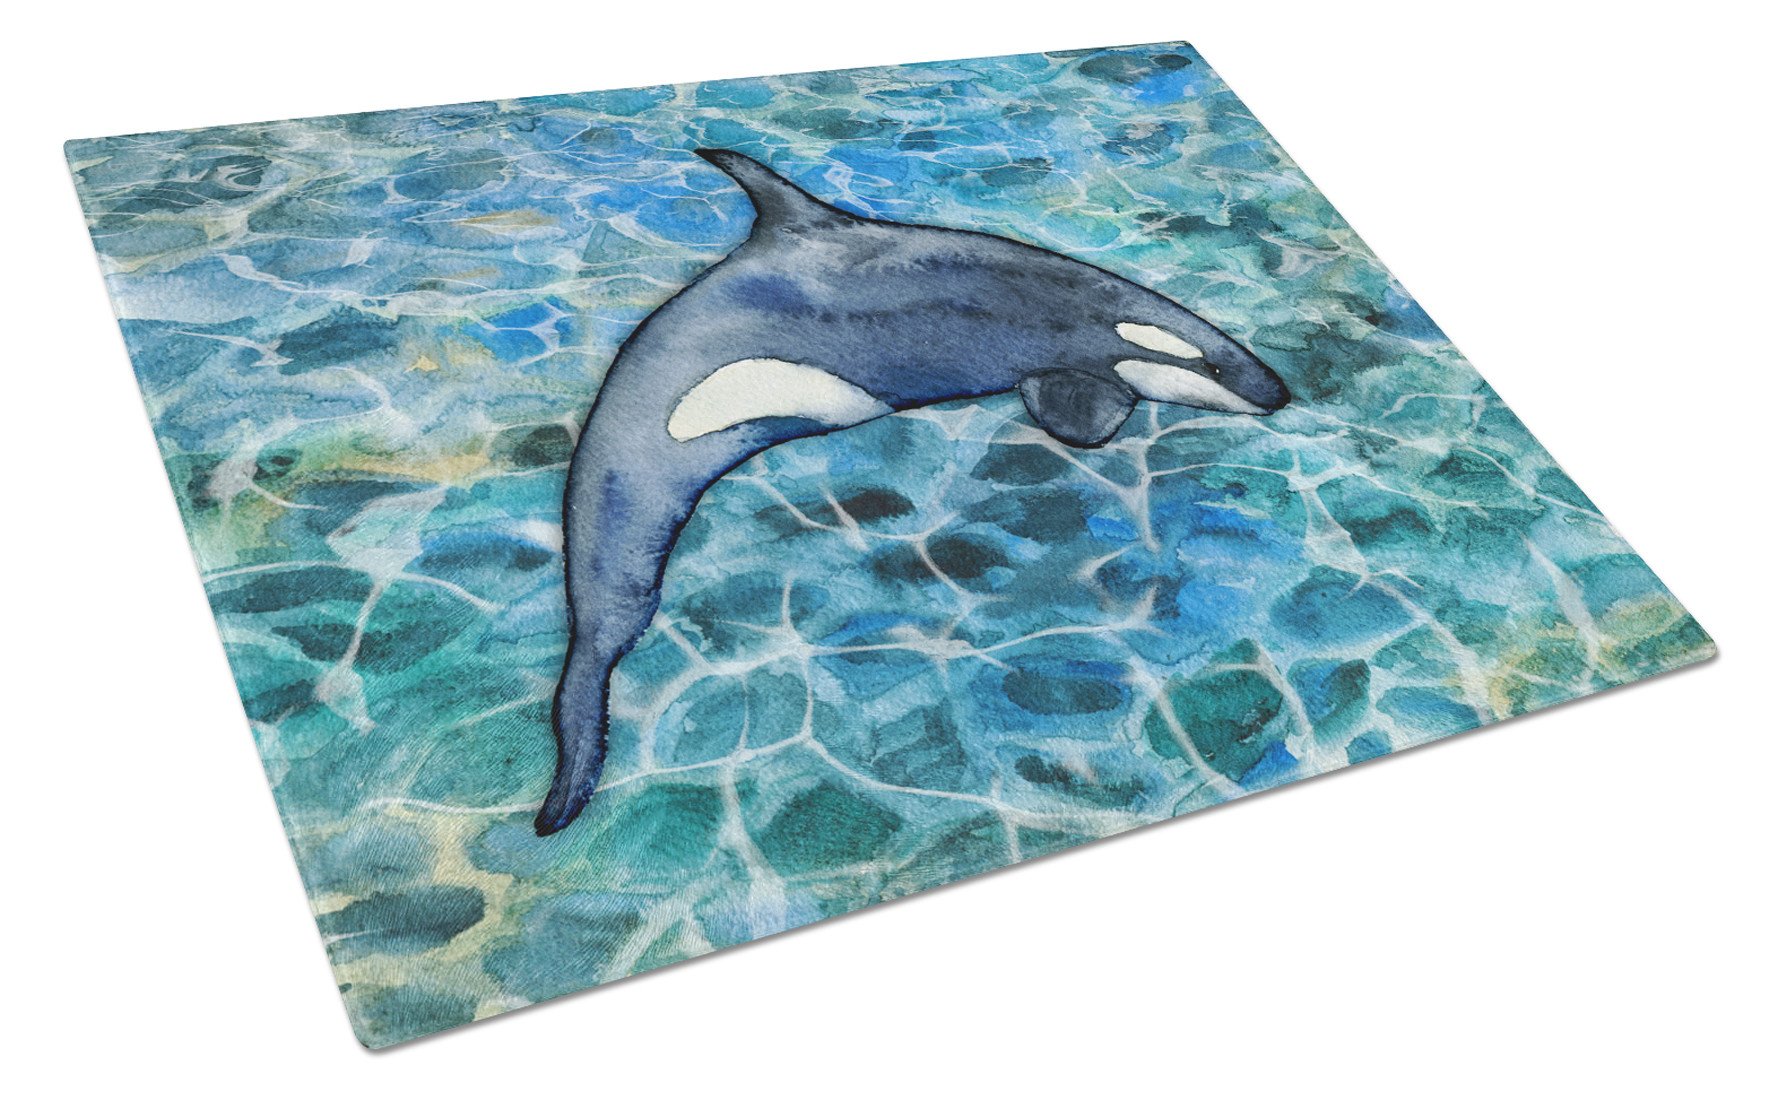 Killer Whale Orca #2 Glass Cutting Board Large BB5335LCB by Caroline's Treasures